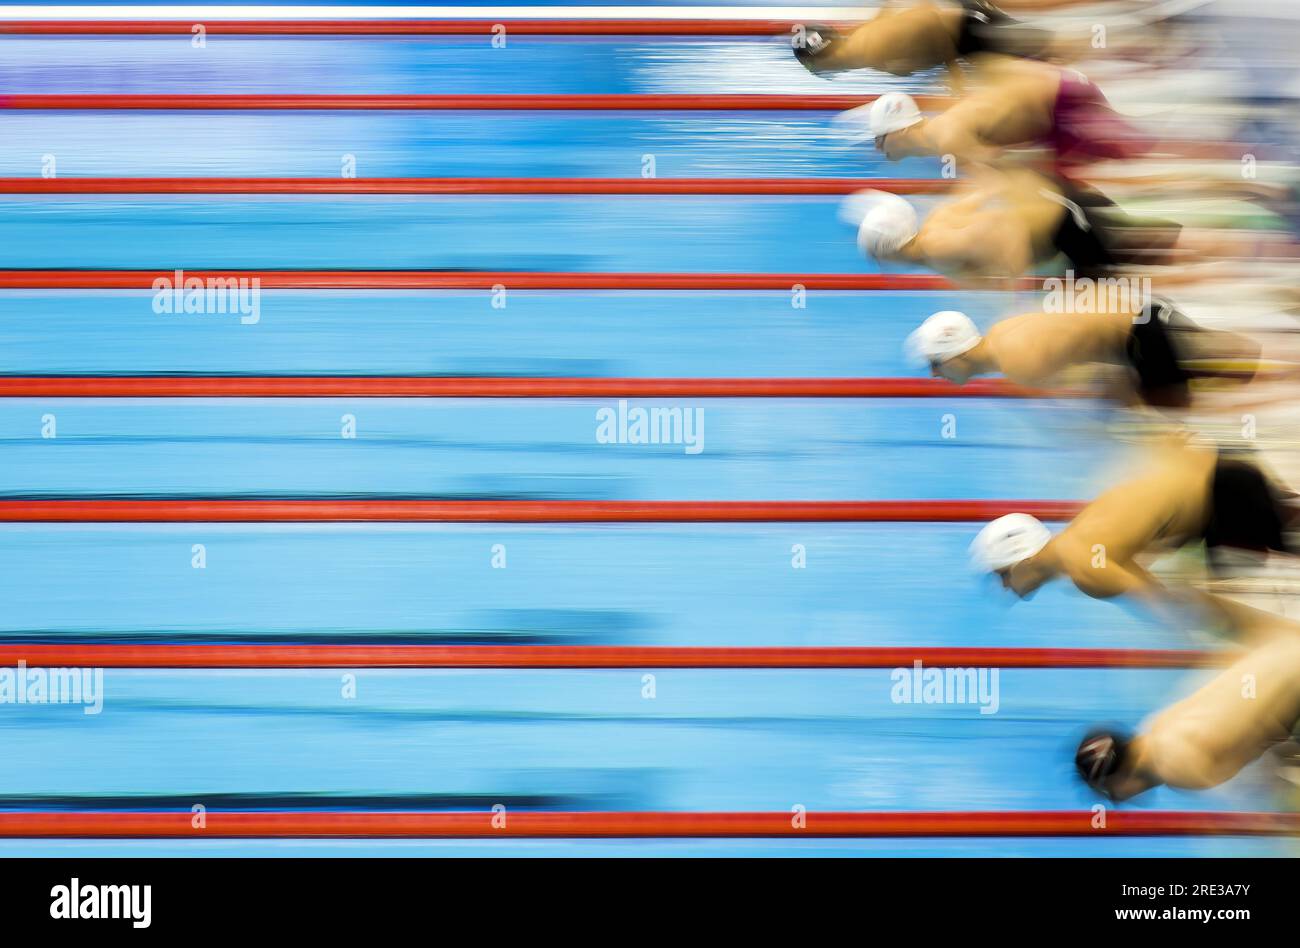 FUKUOKA - Swimmers start the men's 200 butterfly during the third day of the World Swimming Championships in Japan. ANP KOEN VAN WEEL Stock Photo